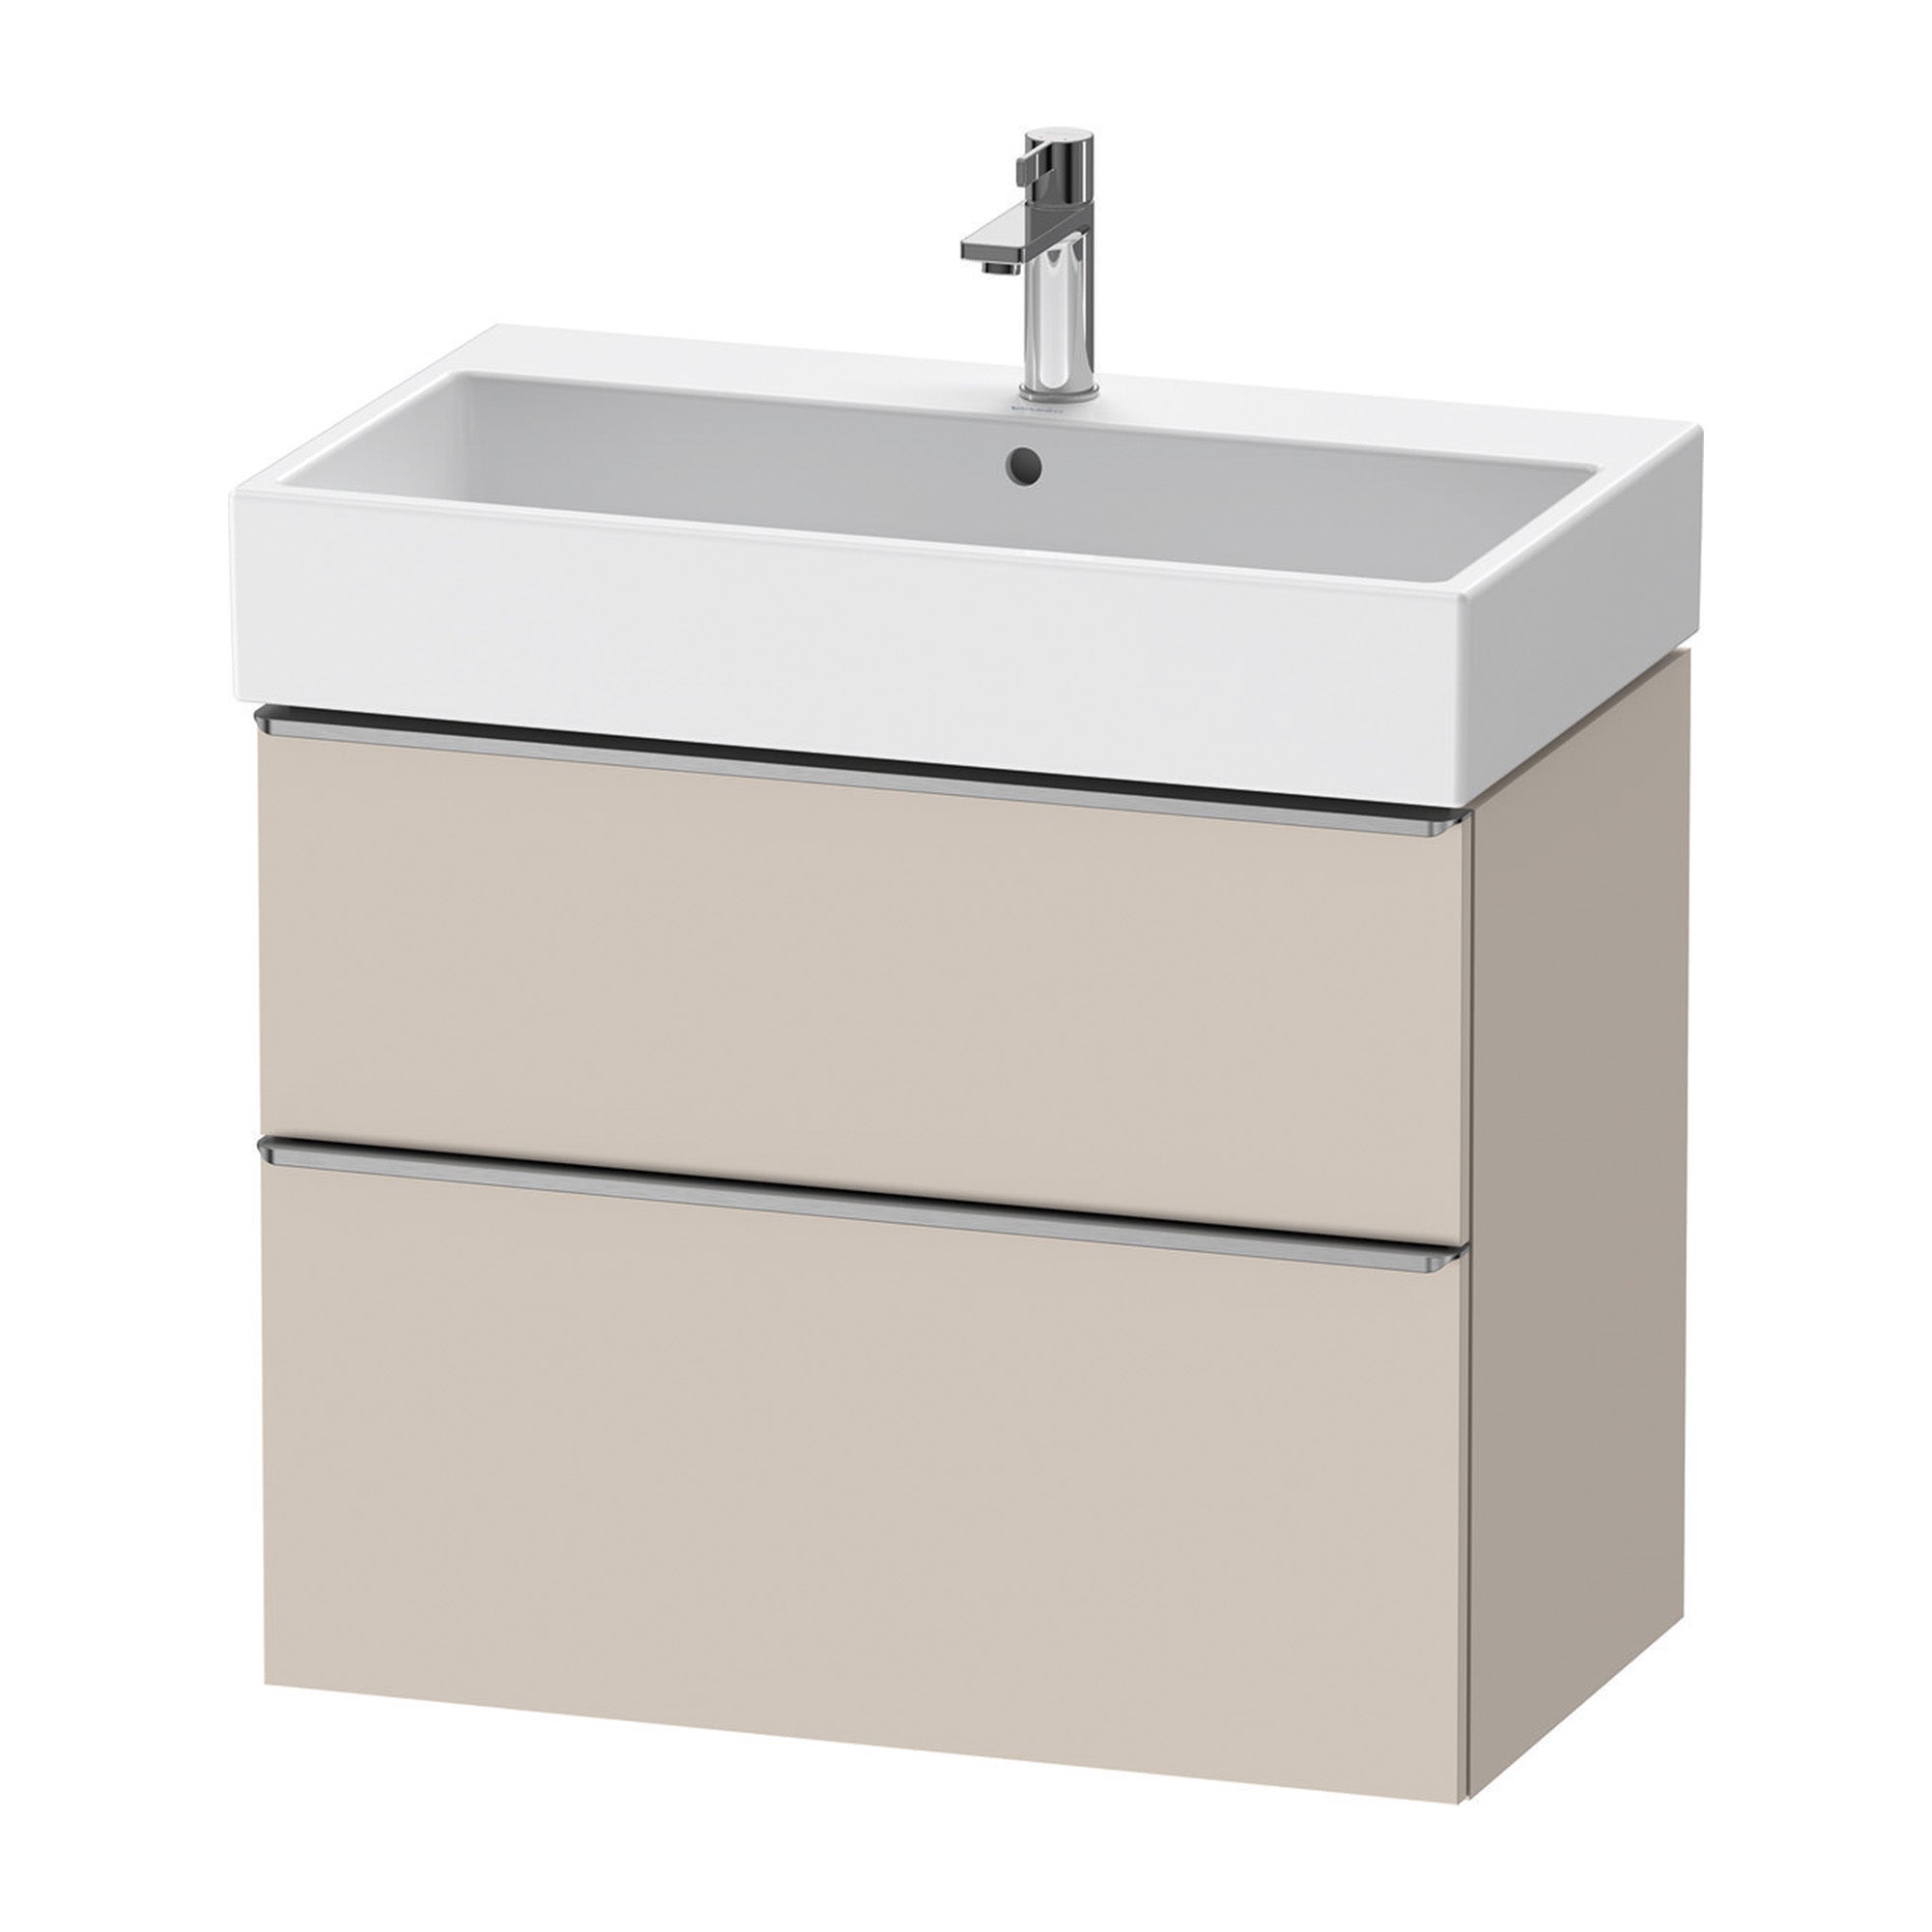 duravit d-neo 800 wall mounted vanity unit with vero basin taupe stainless steel handles